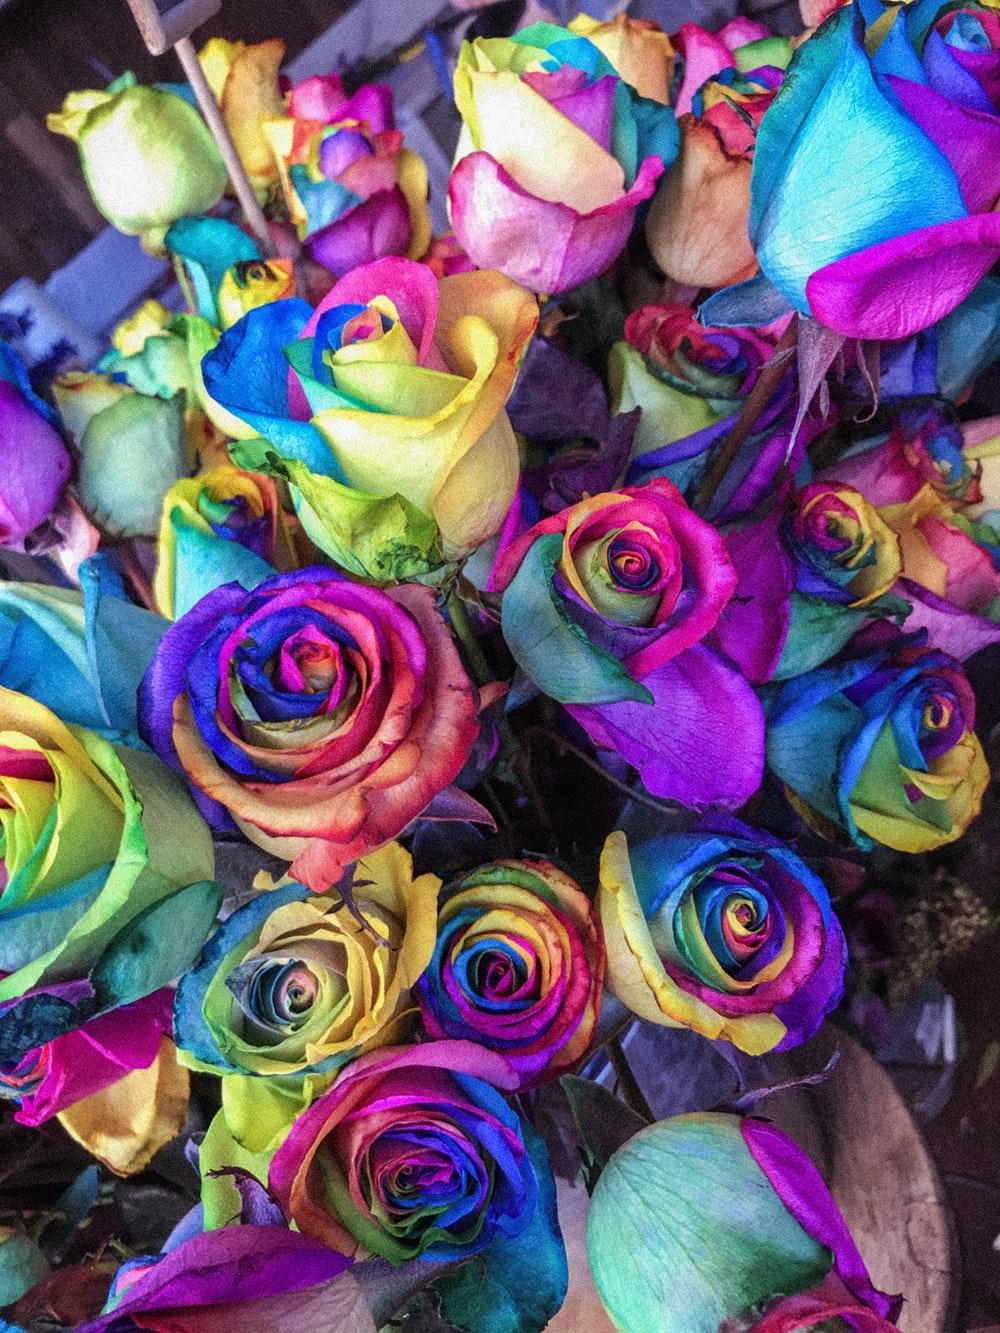 Rainbow Rose Picture. Download Free Image